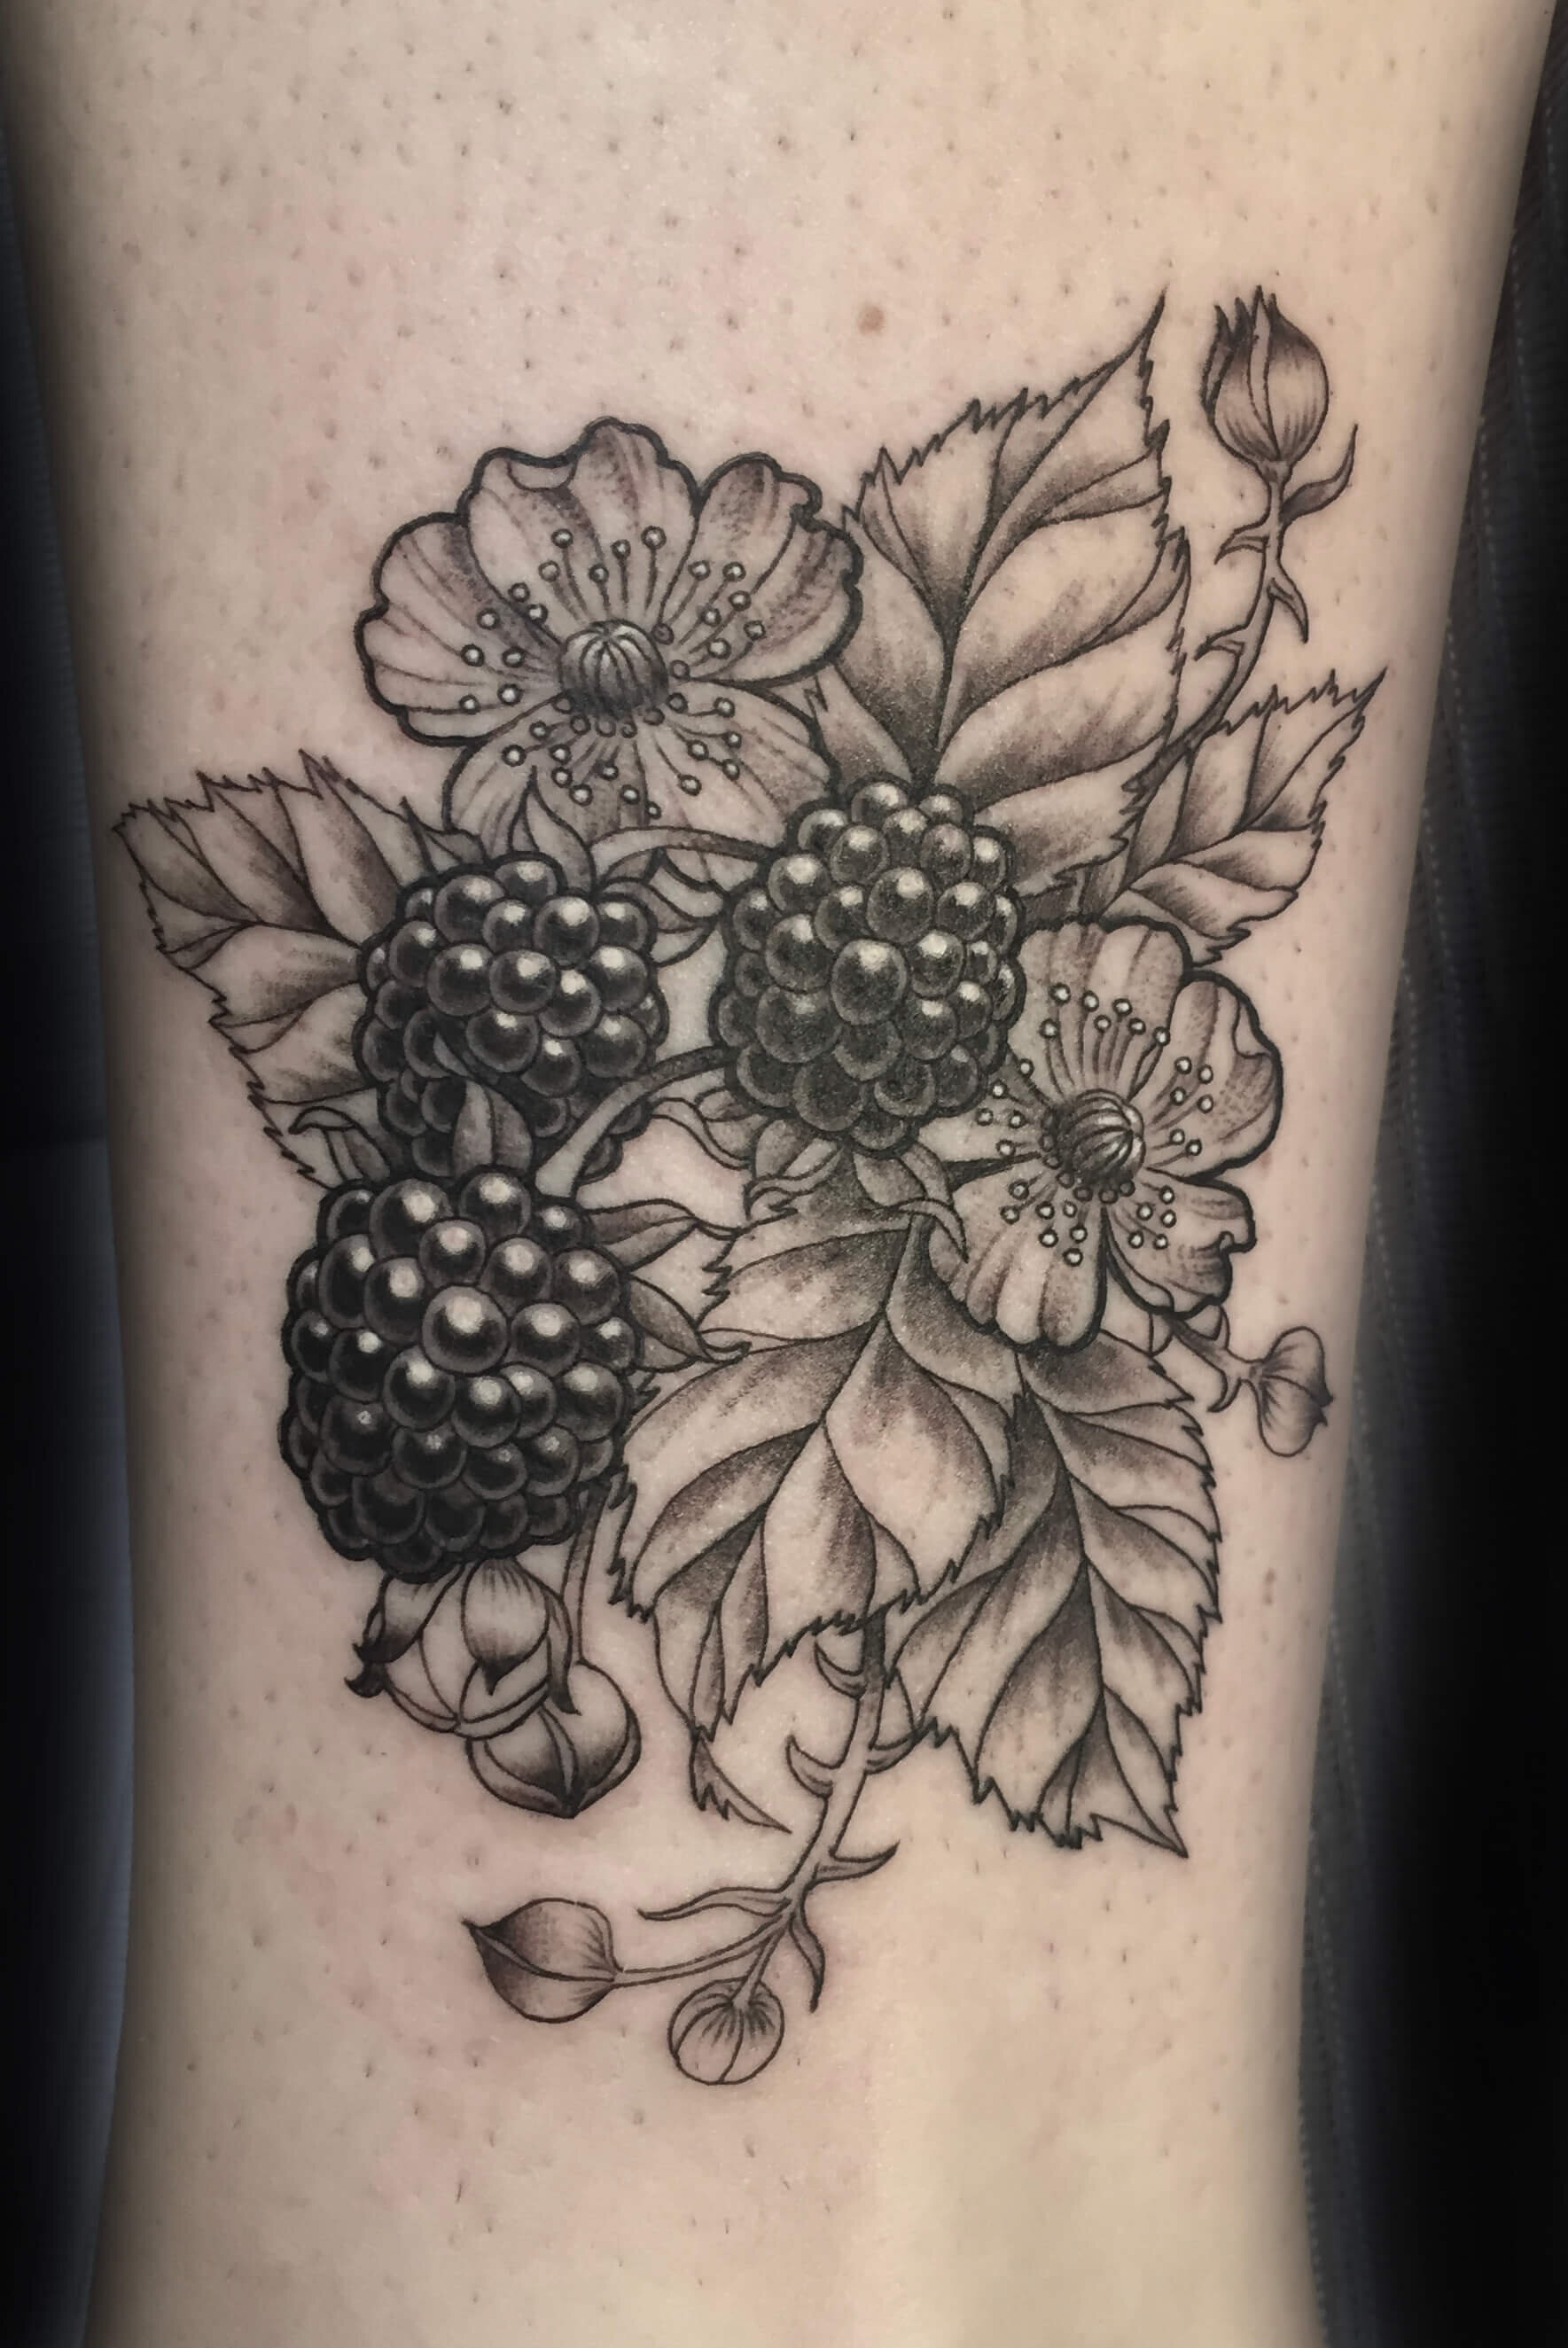 Blackberry branch with lady bug by Monica Snyder at Eden body arts Dallas  Tx  rtattoos